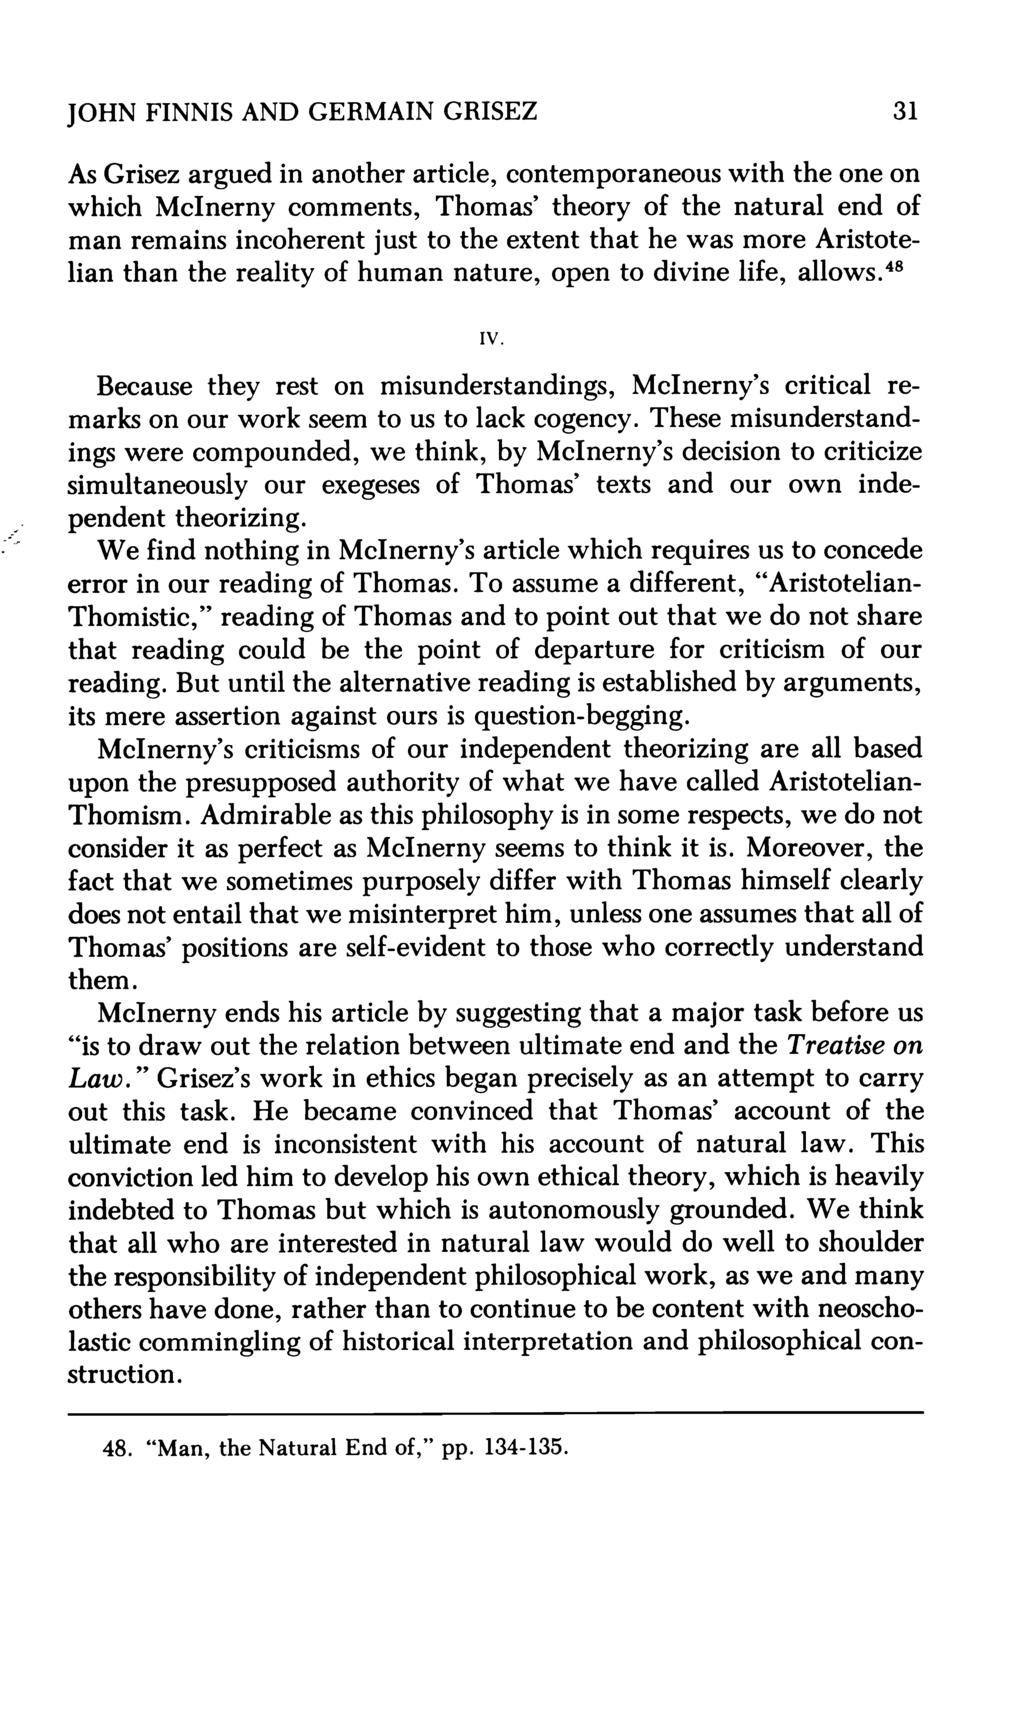 JOHN FINNIS AND GERMAIN GRISEZ 31 As Grisez argued in another article, contemporaneous with the one on which Mclnerny comments, Thomas' theory of the natural end of man remains incoherent just to the